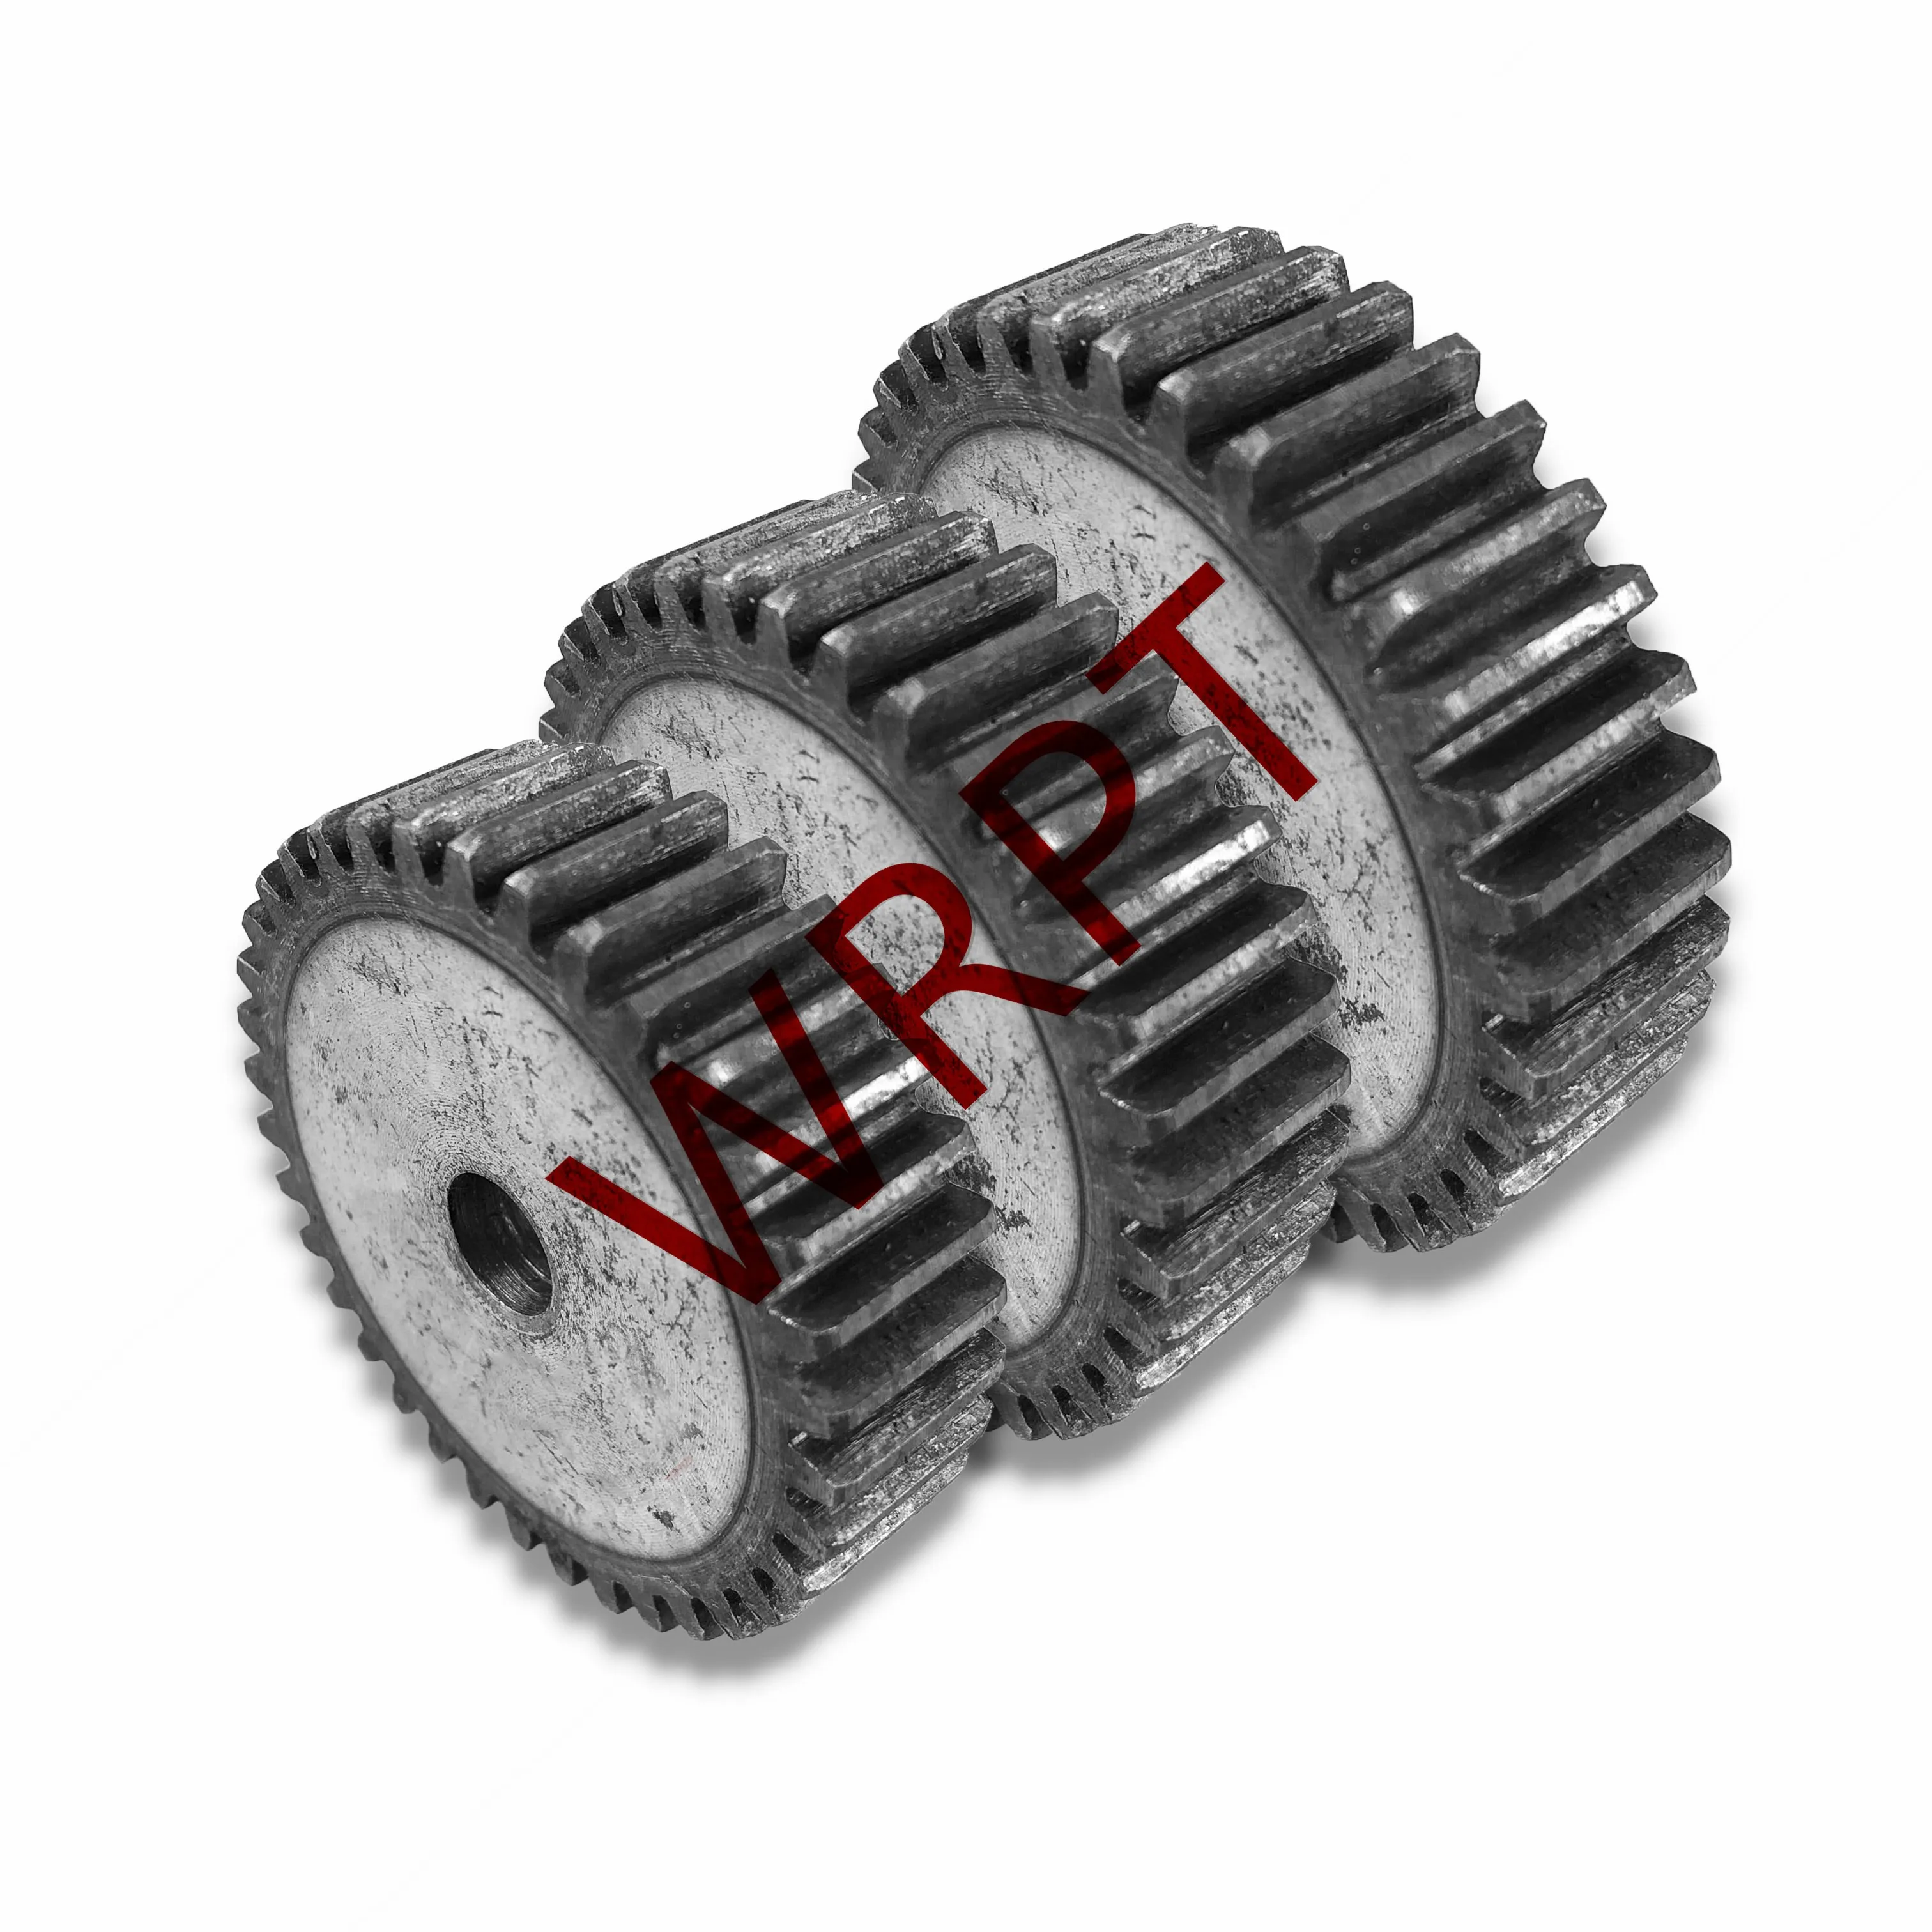 

1Pc 3 modulus spur gears 56 teeth standard hardened cylindrical gears, thickness 30mm, 45# steel tooth surface quenched